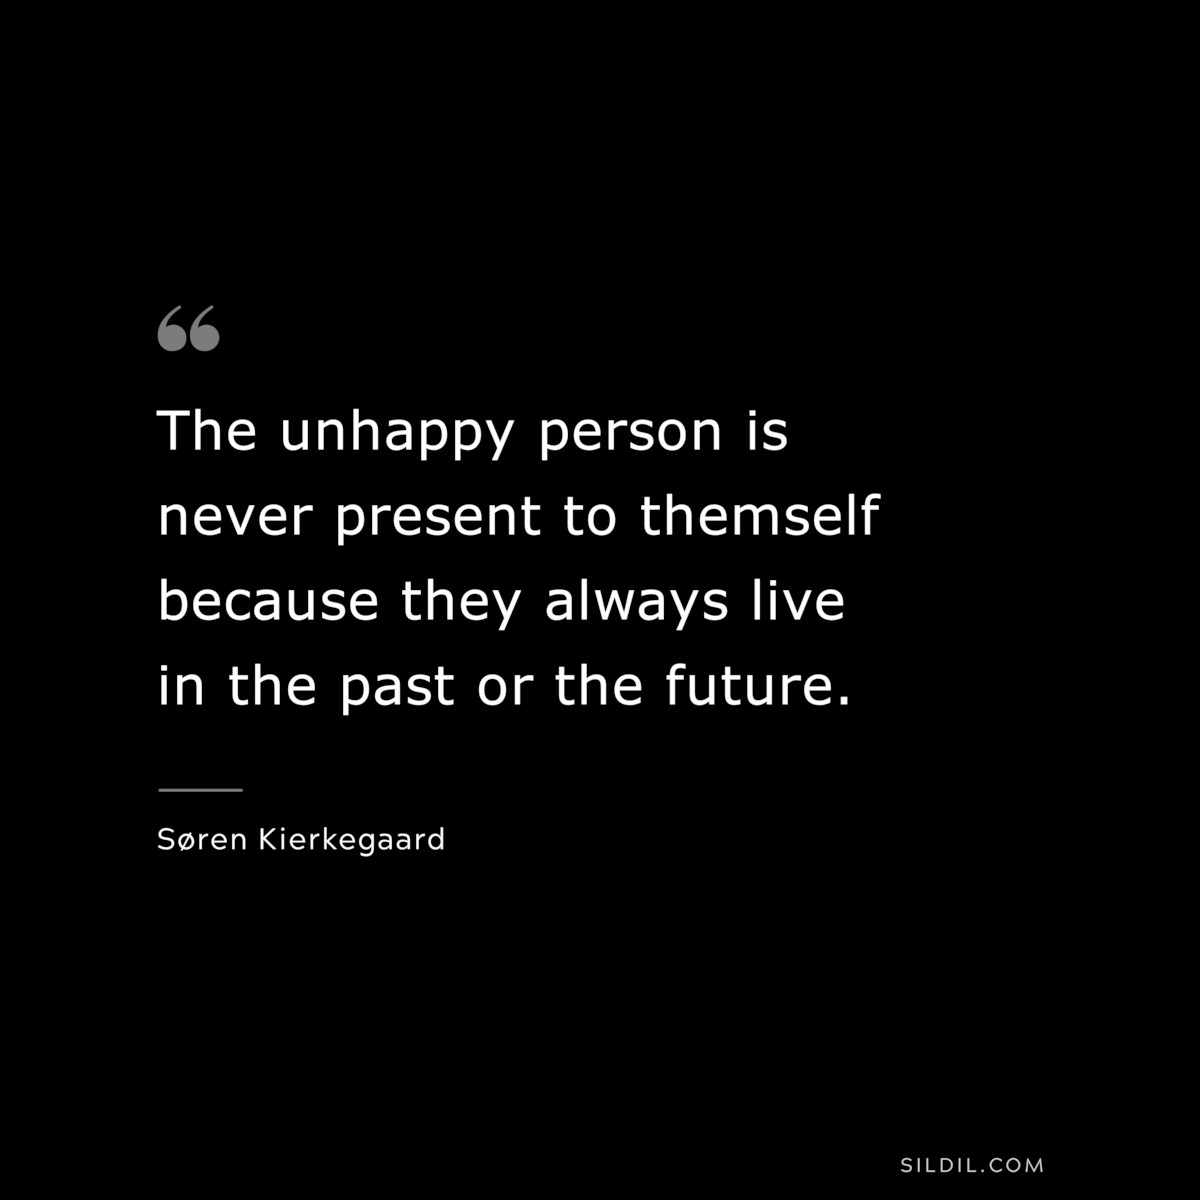 The unhappy person is never present to themself because they always live in the past or the future. ― Søren Kierkegaard